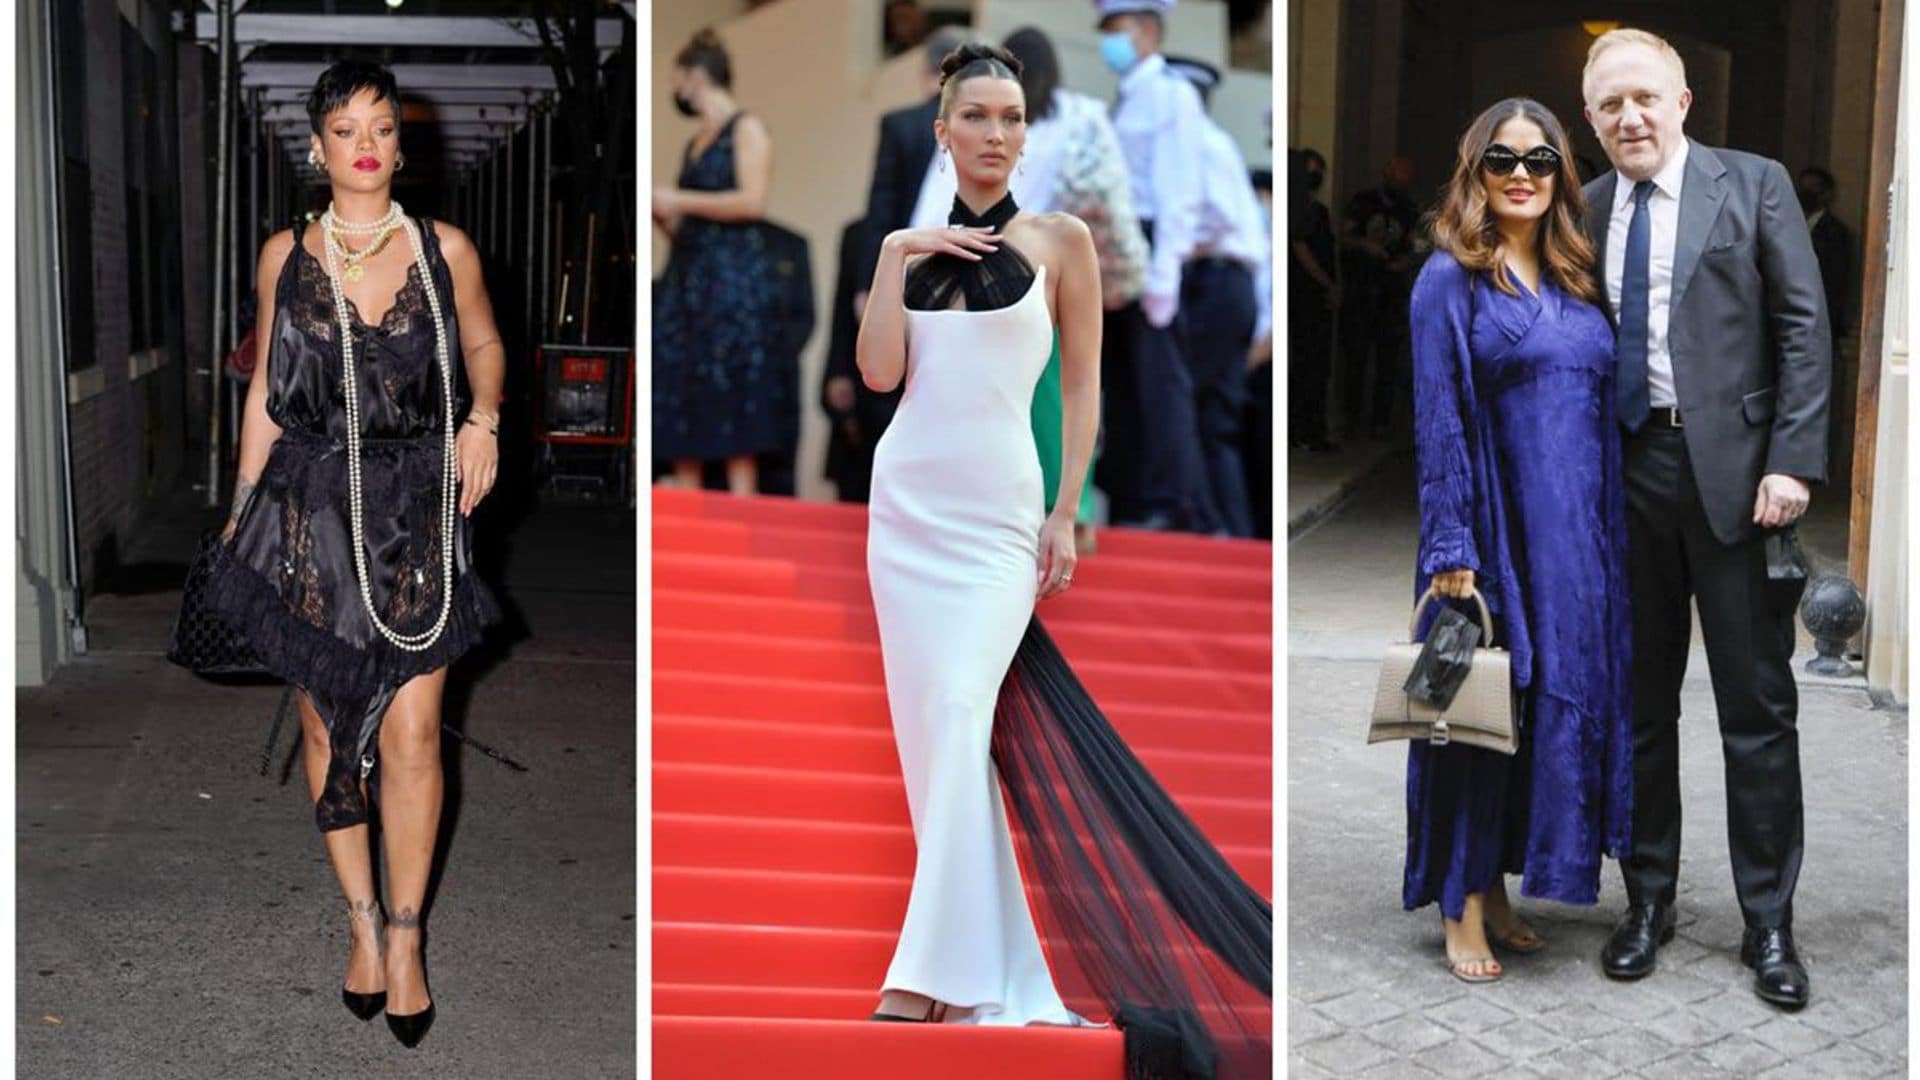 The Top 10 Celebrity Style Looks of the Week - July 5